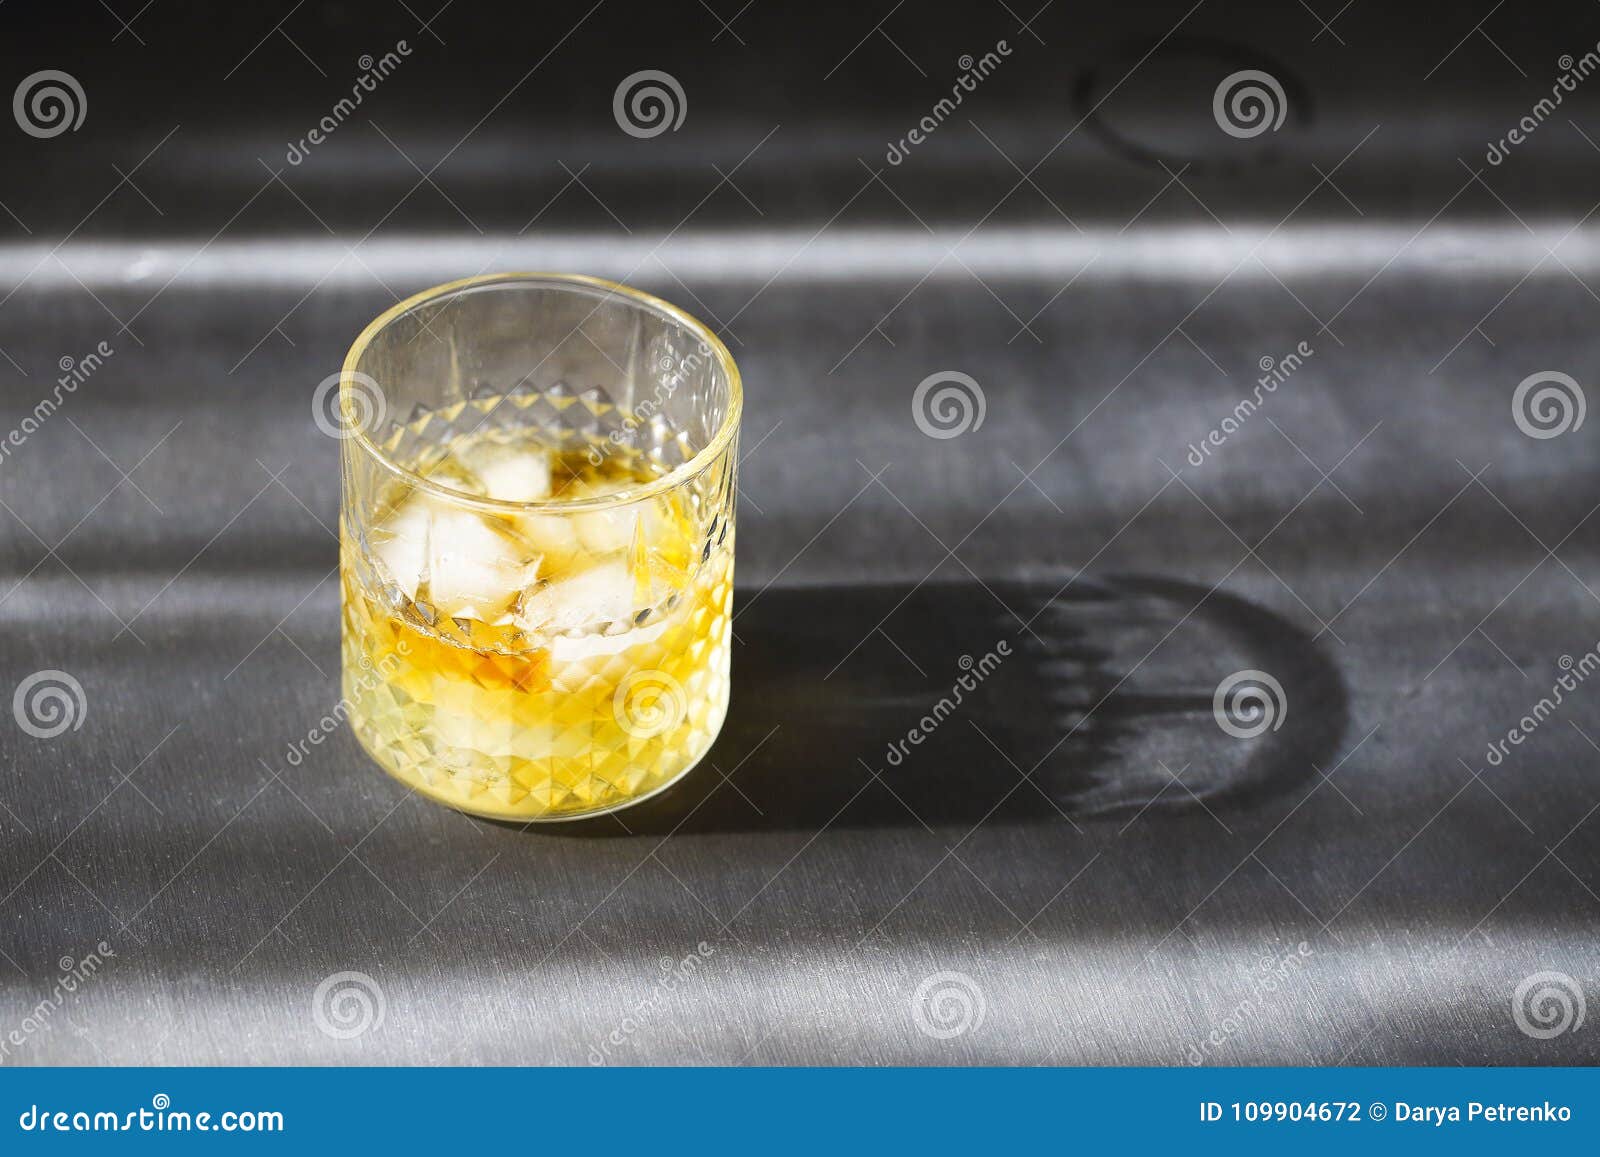 glass of whiskey on dark background. close up